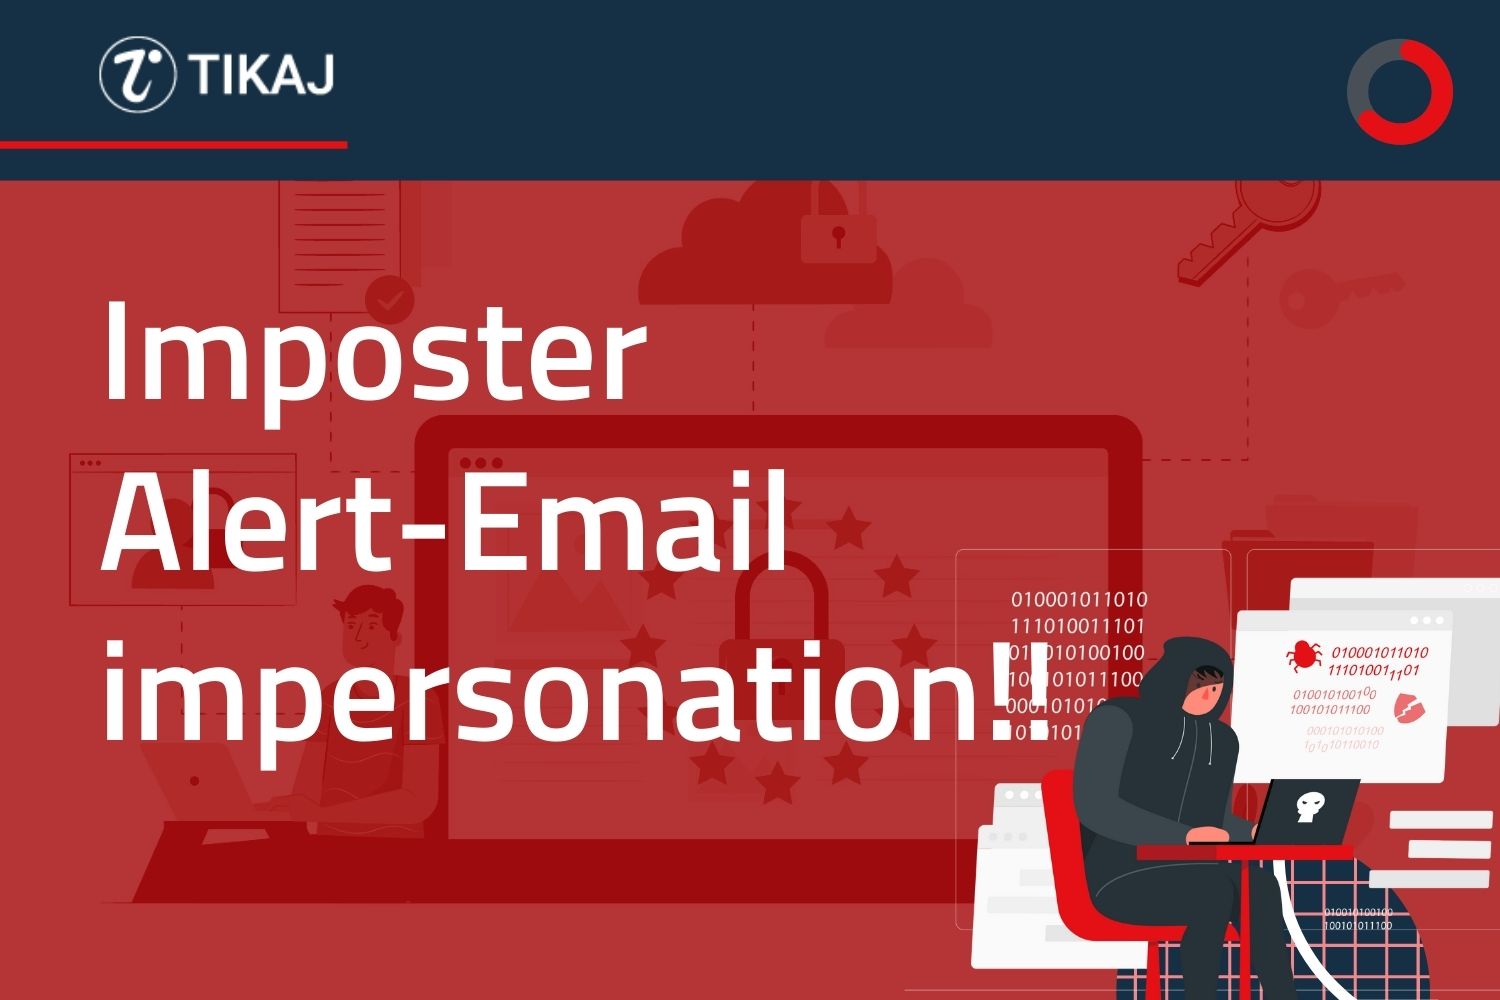 Imposter Alert-Email impersonation: 5 Tips To Mitigate the Risk!!